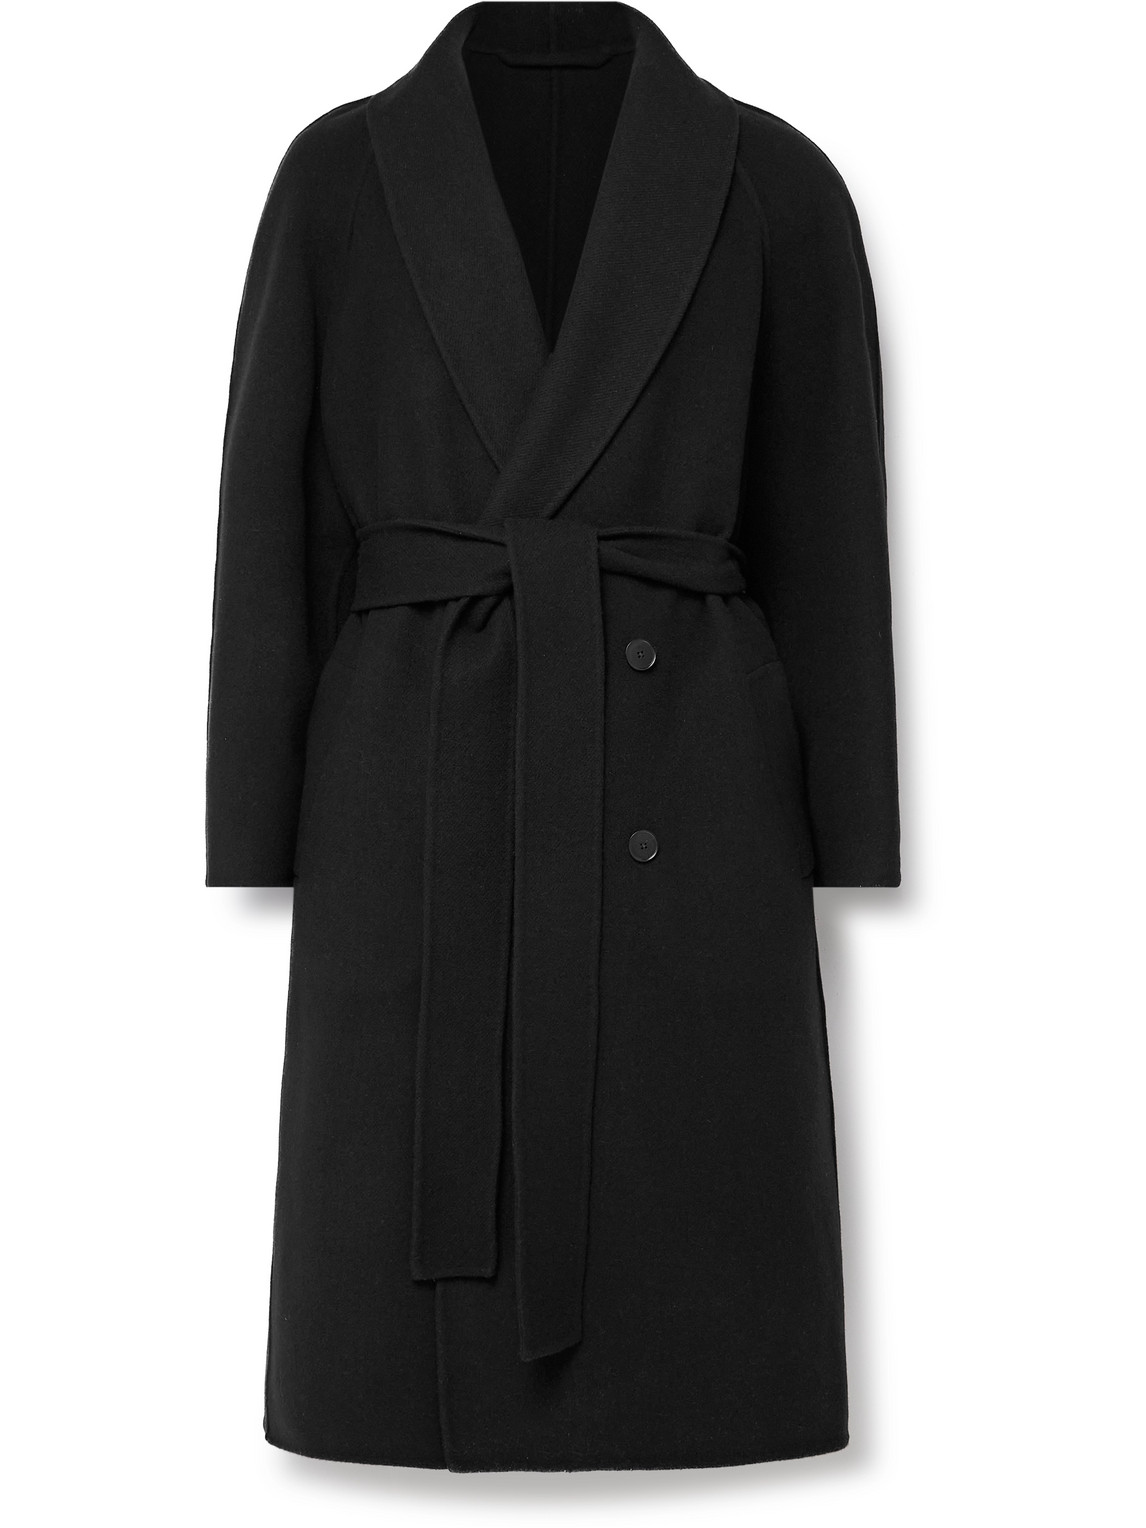 The Row - Ferro Belted Double-Breasted Wool-Blend Coat - Men - Black - L von The Row